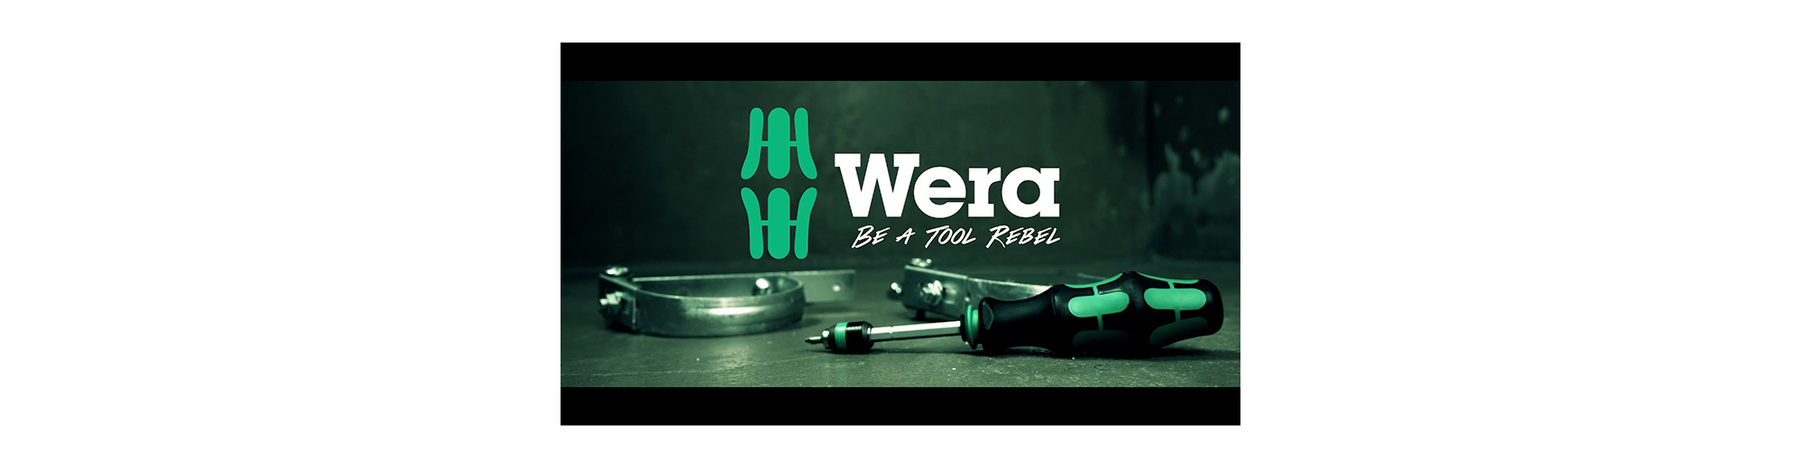 Wera - The Brand for "Tool Rebels"